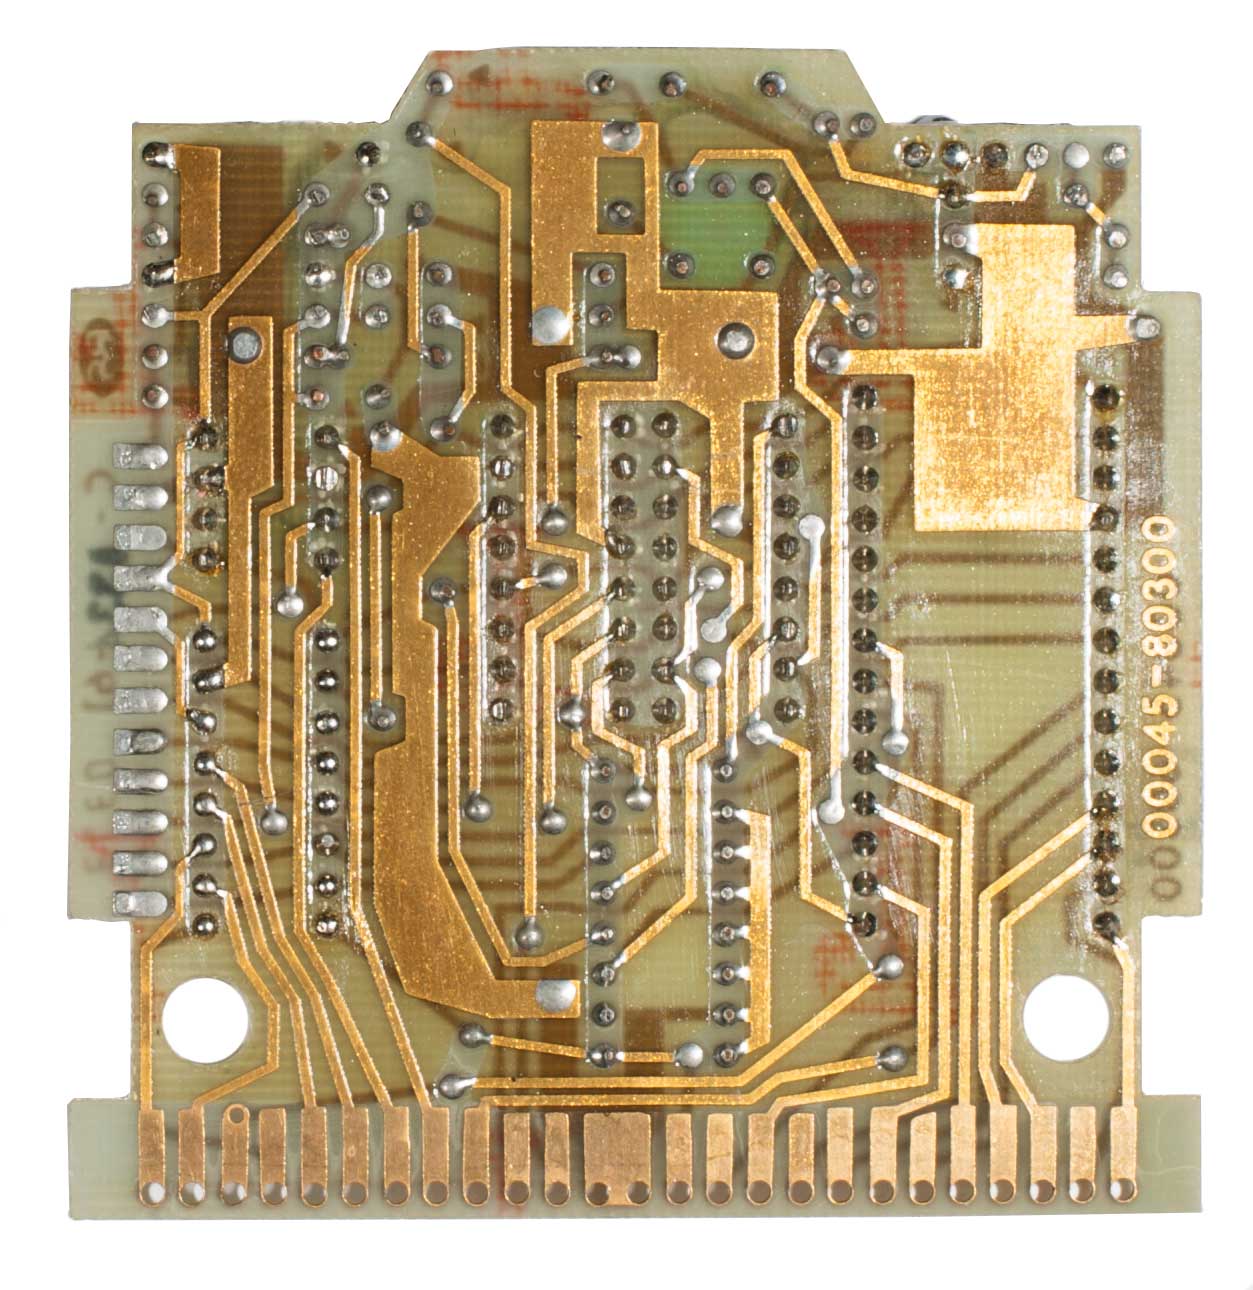 A PCB with a gold finish